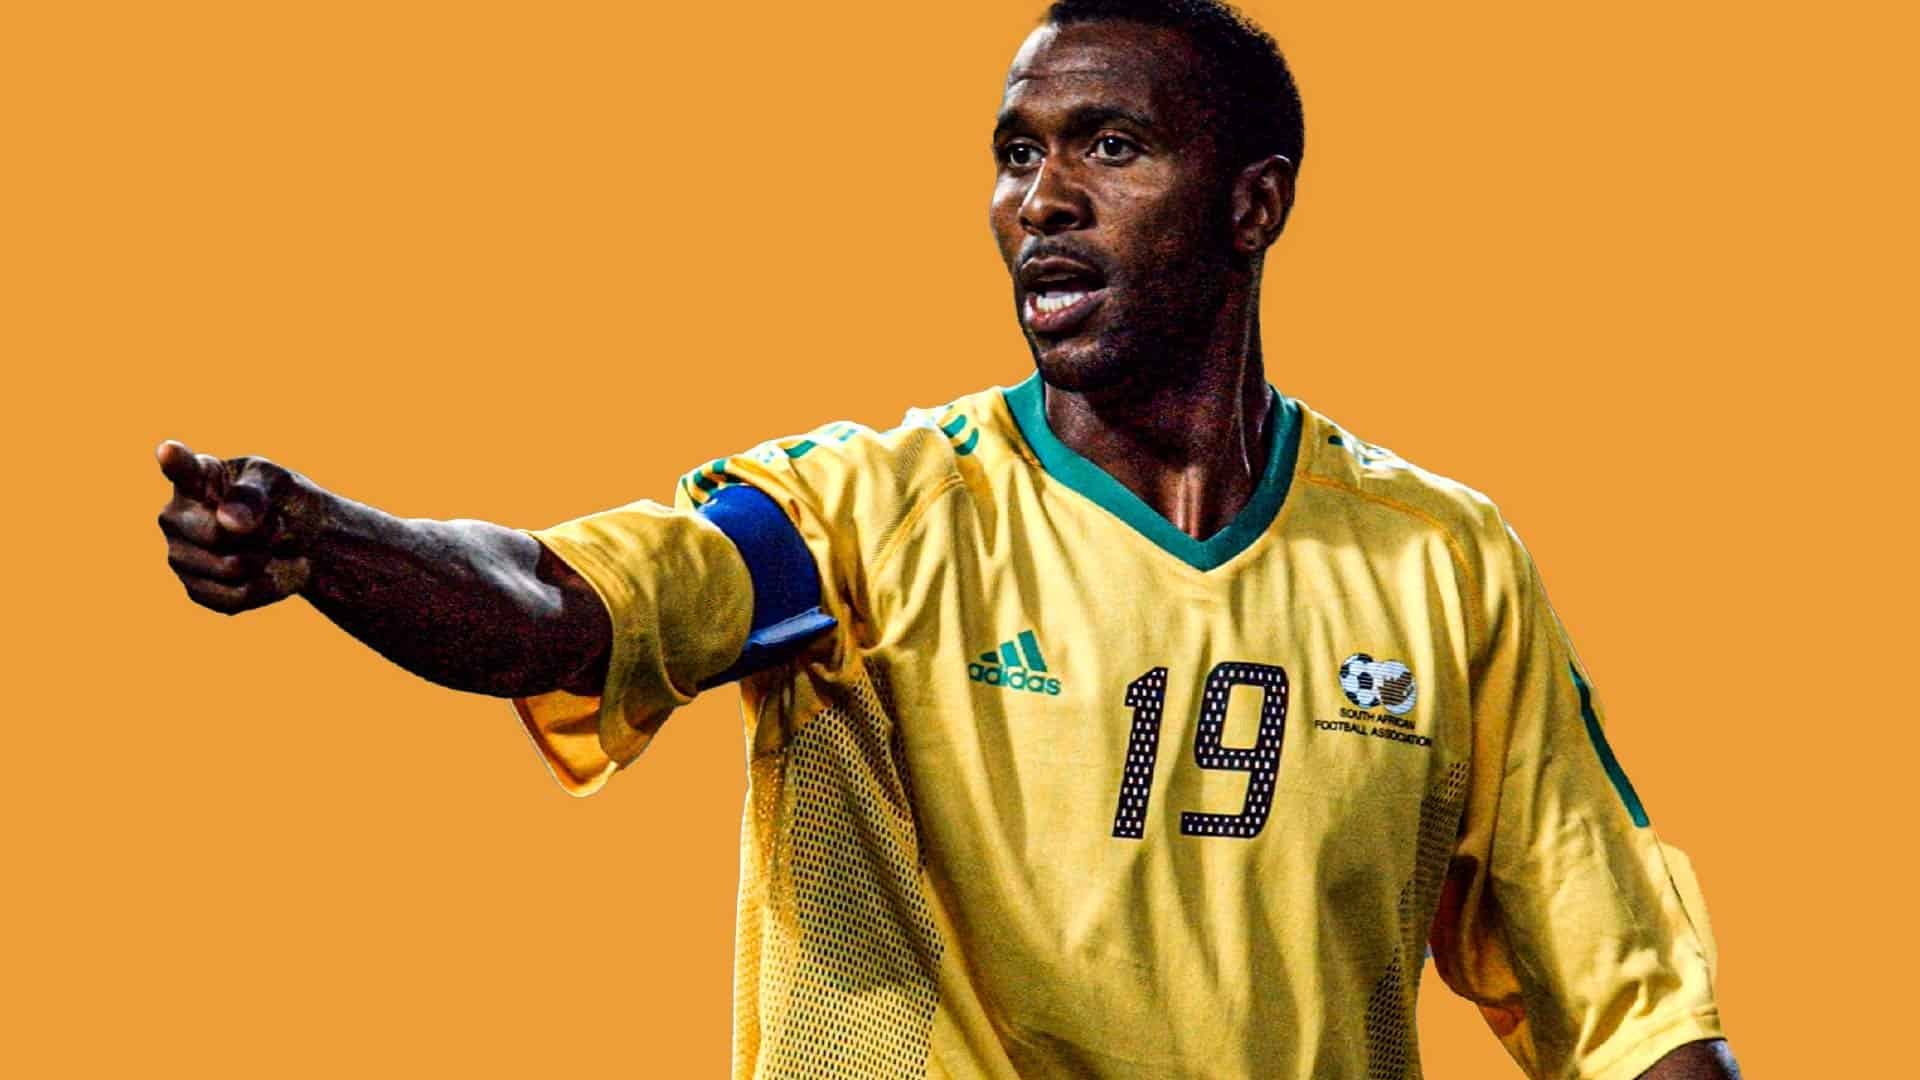 Lucas Radebe wearing the captain's armband for South Africa at the 2002 World Cup